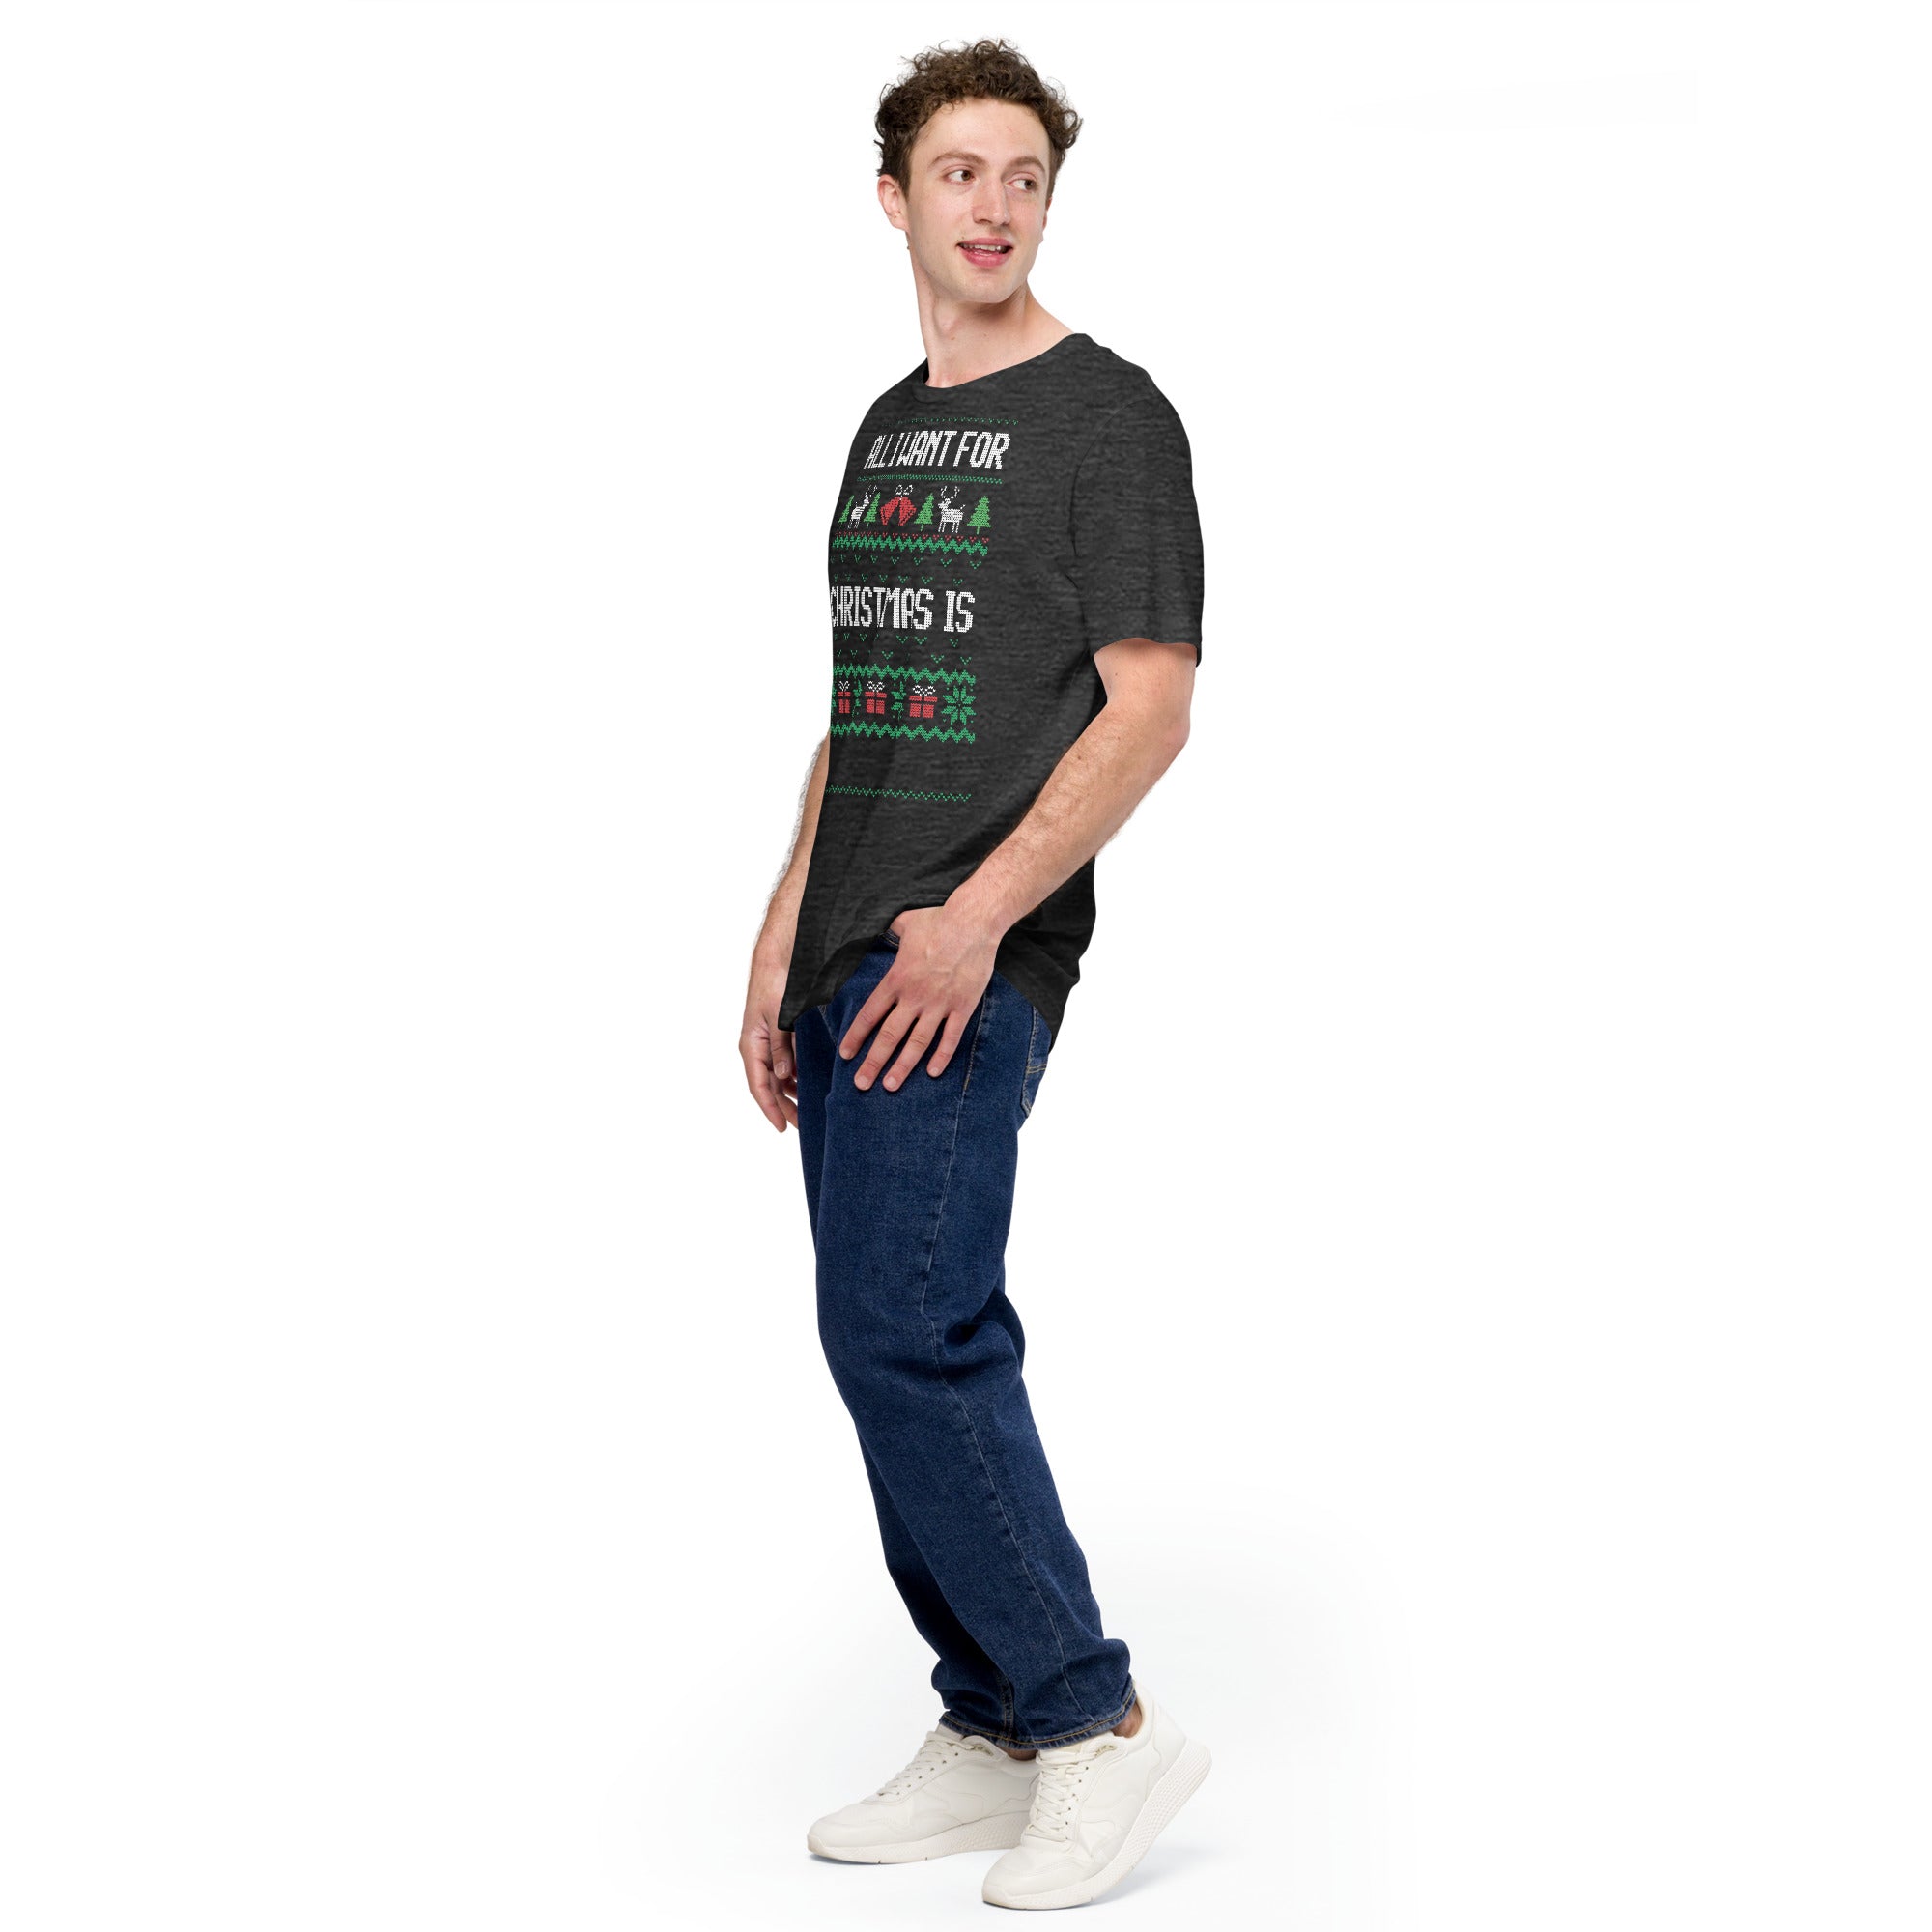 All I Want For Christmas Is  Unisex t-shirt